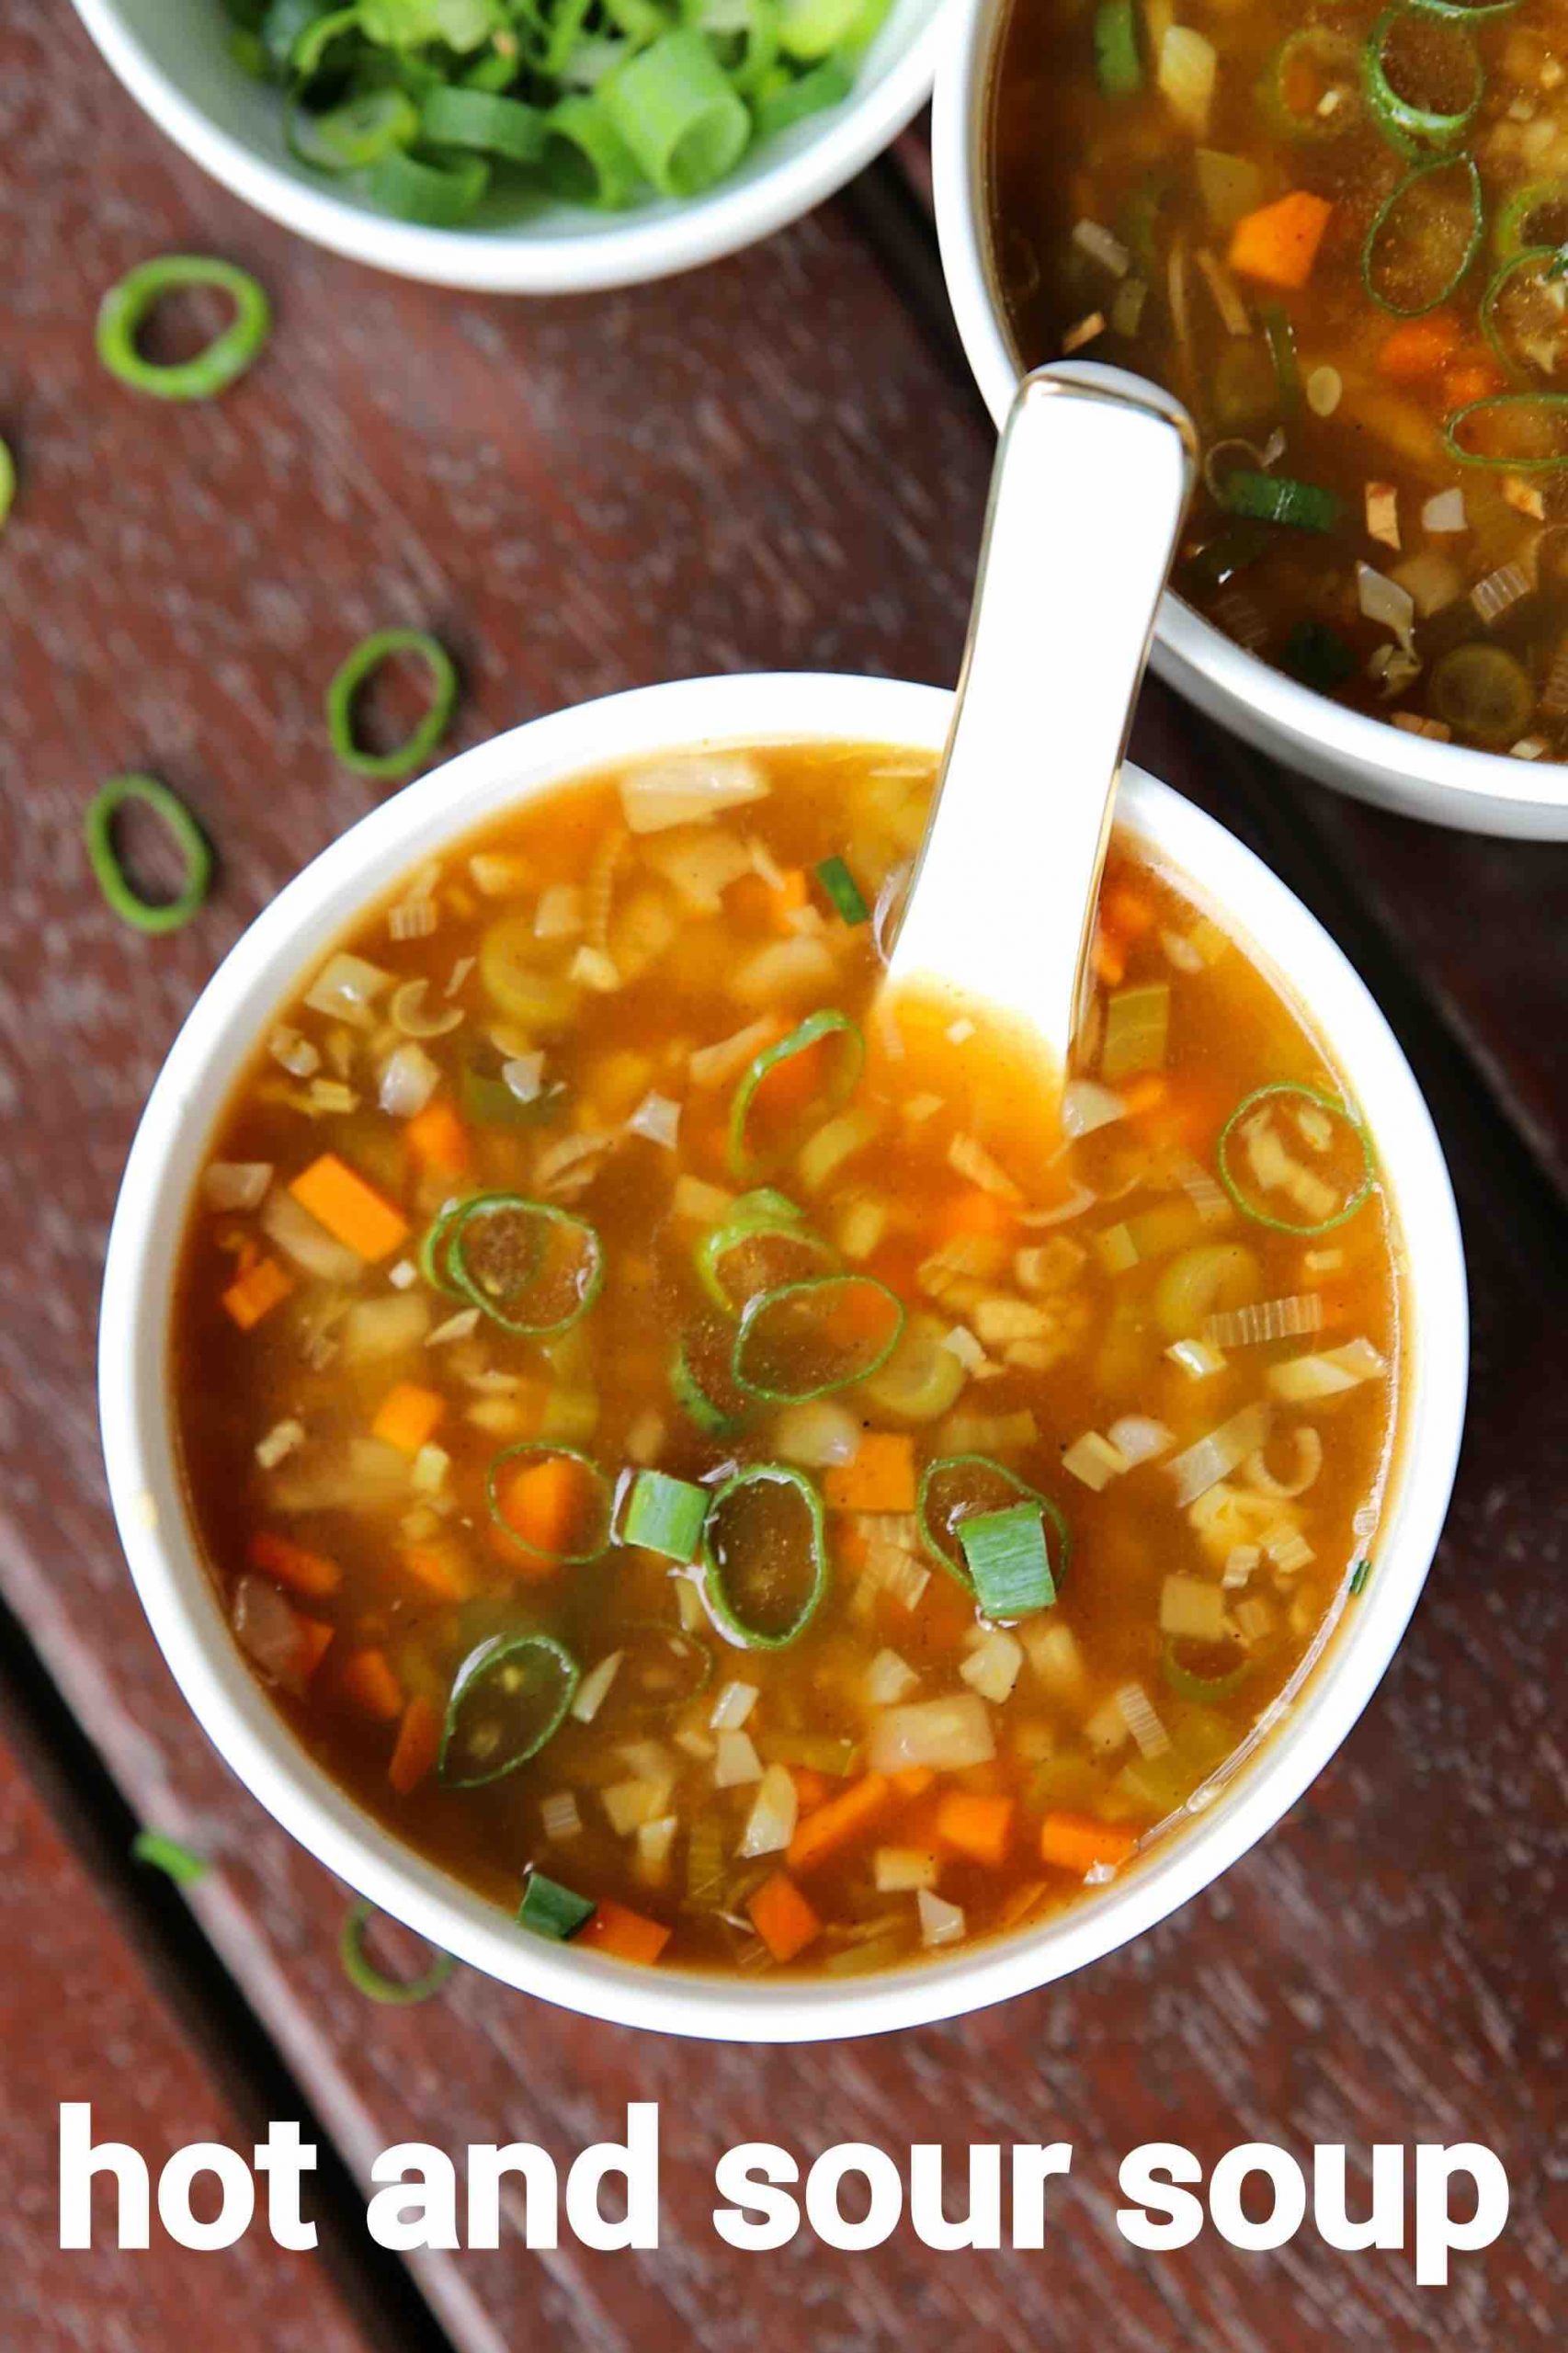 https://hebbarskitchen.com/wp-content/uploads/2020/01/hot-and-sour-soup-recipe-hot-n-sour-soup-hot-sour-soup-recipe-1-scaled.jpeg